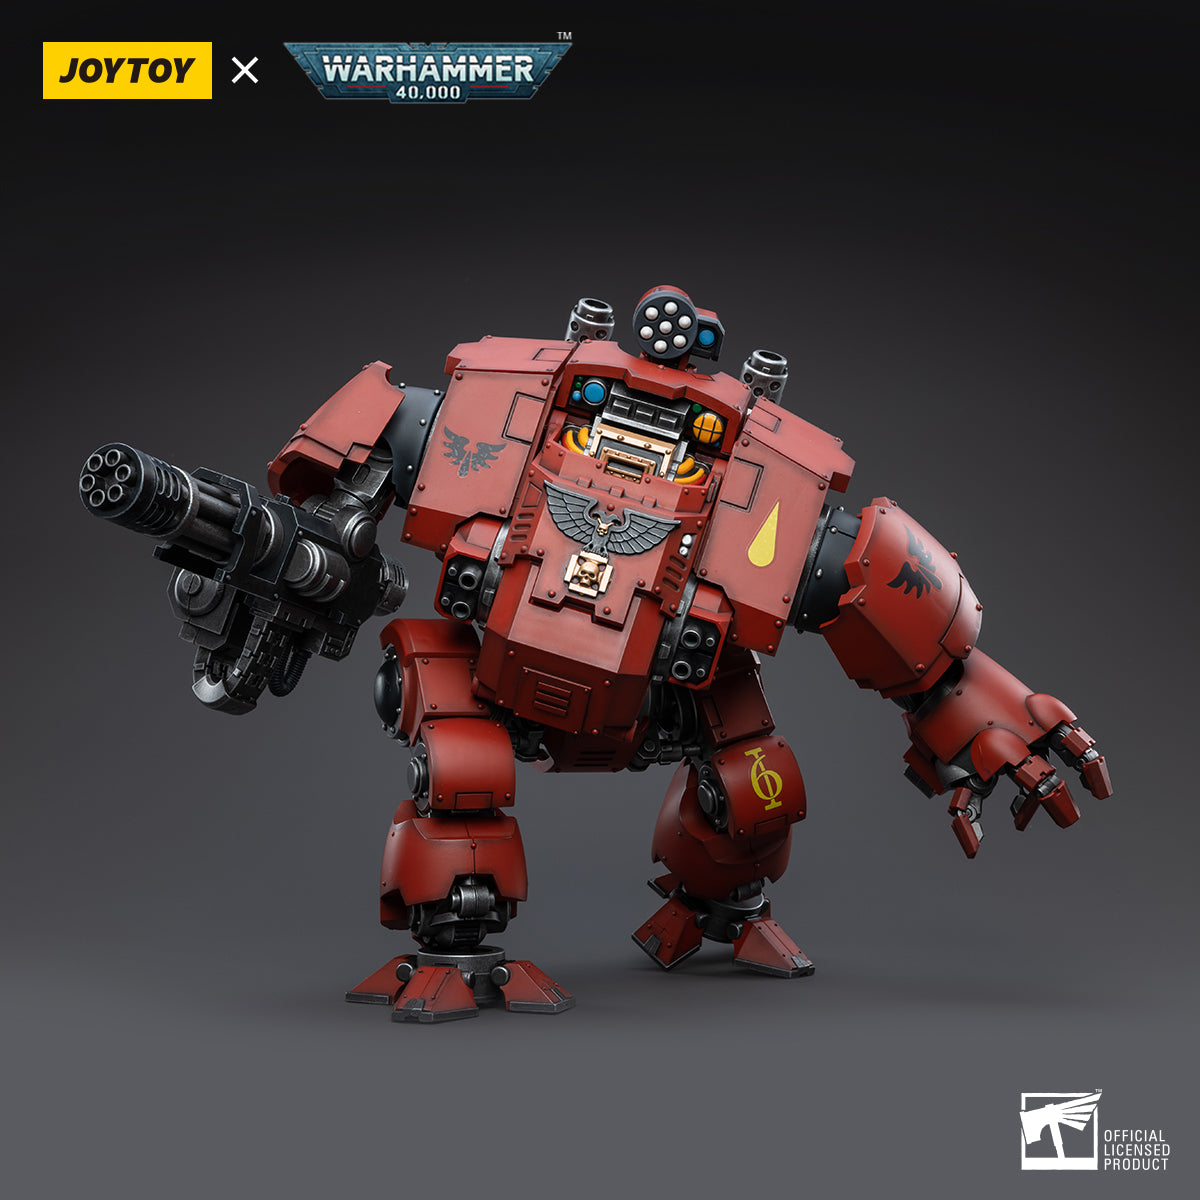 Warhammer Collectibles: 1/18 Scale Blood Angels Redemptor Dreadnought